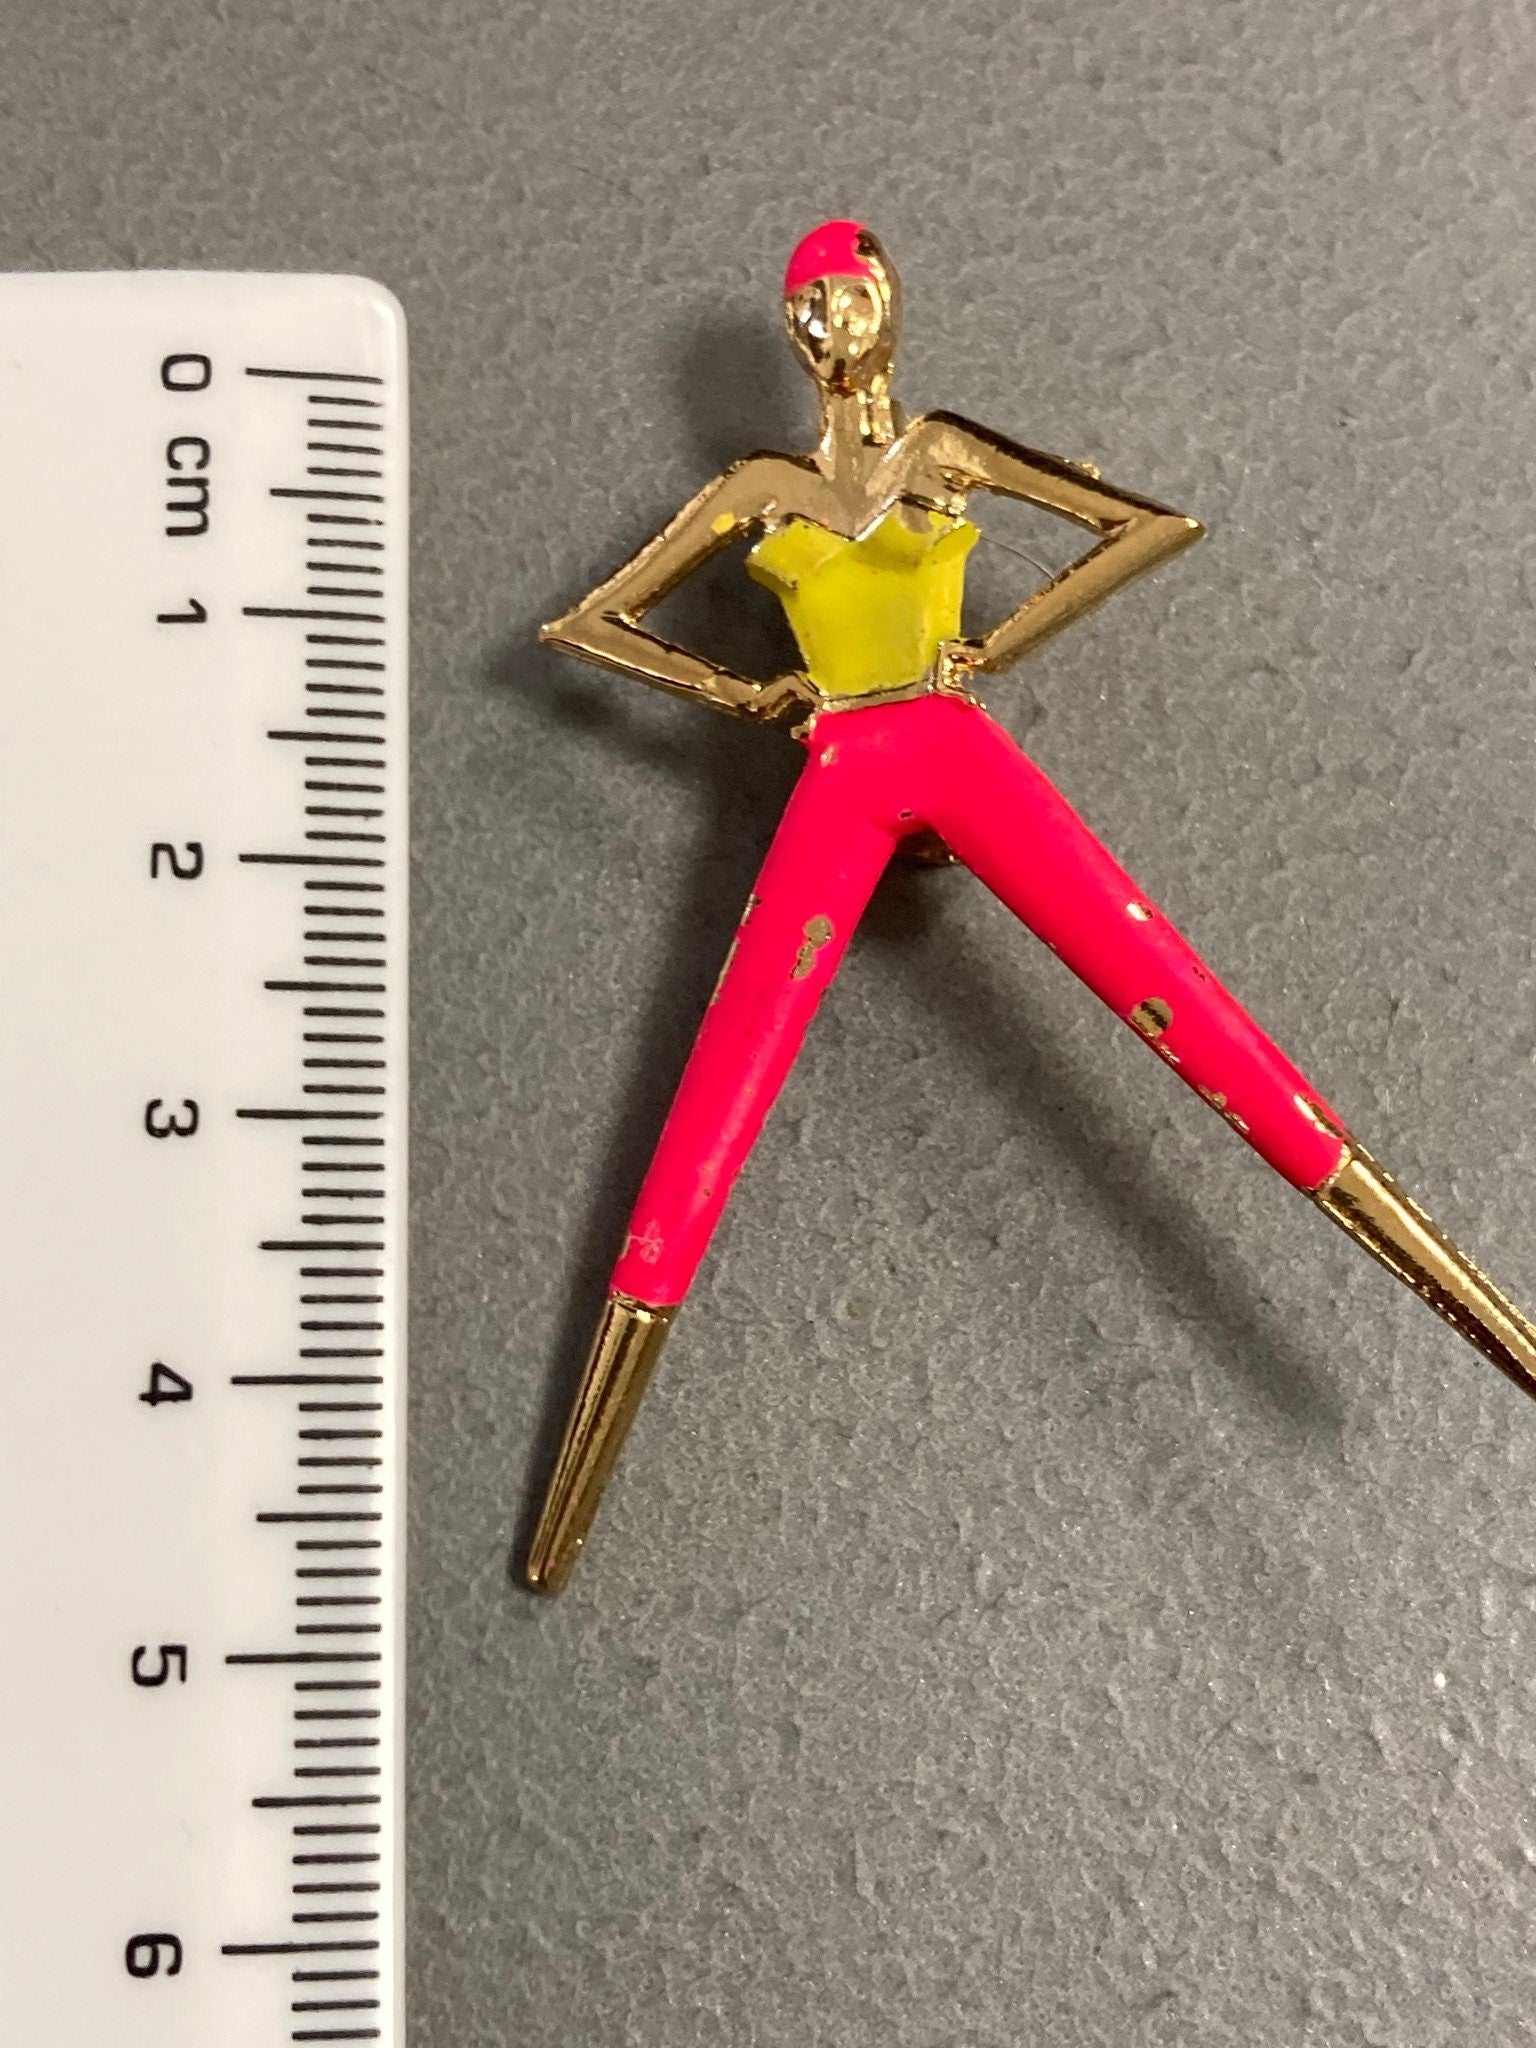 Novelty 1980s Fitness Yoga luminous painted lady exercise brooch gold tone pink yellow